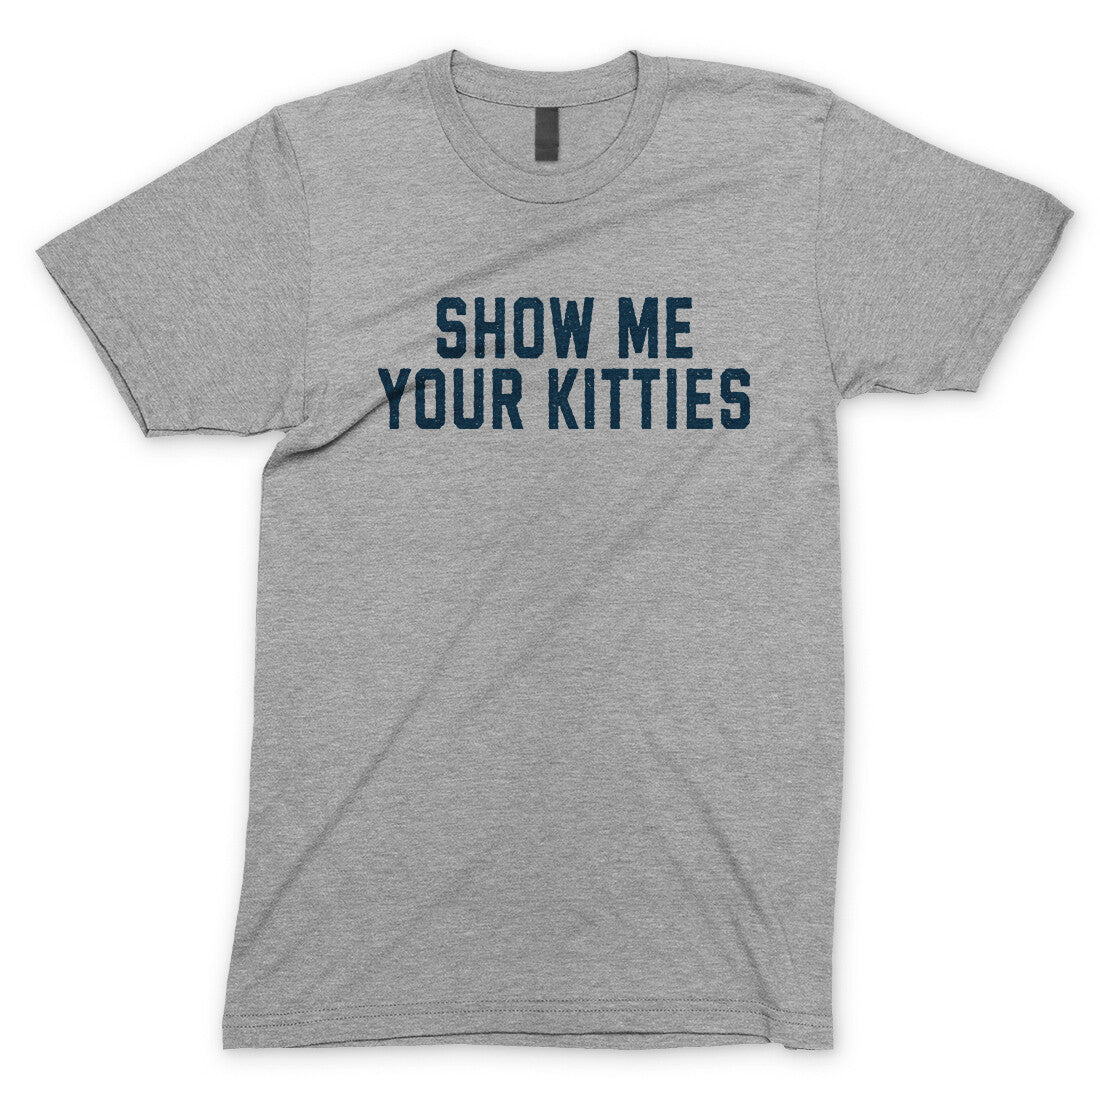 Show me Your Kitties in Sport Grey Color